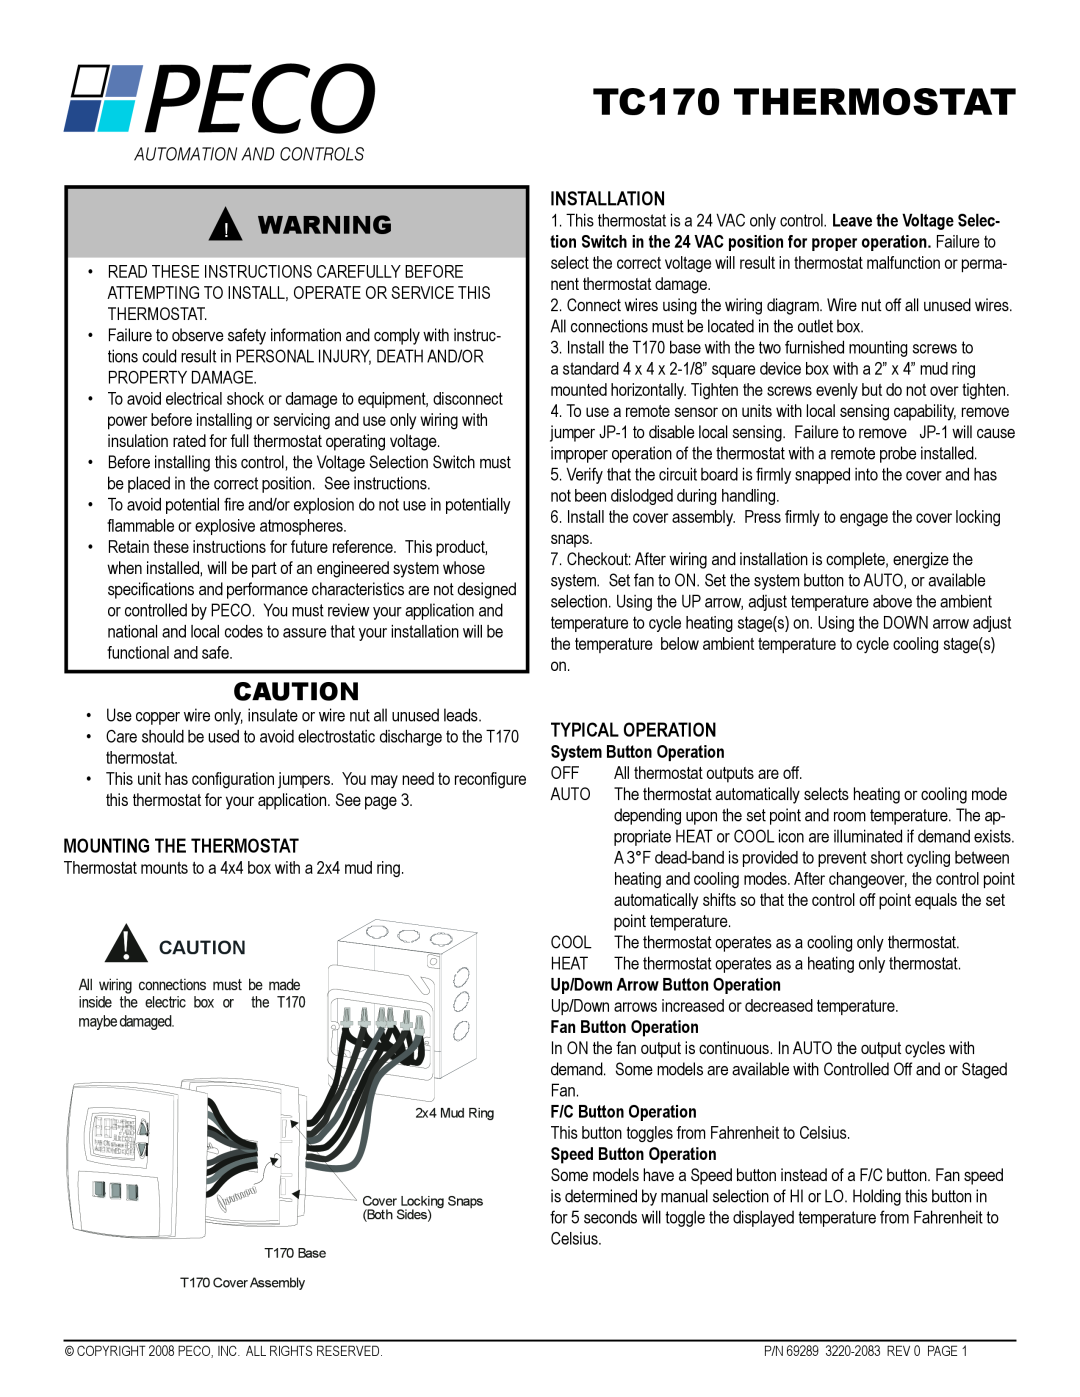 Pecoware manual Mounting The Thermostat, Installation, Typical Operation, System Button Operation, TC170 THERMOSTAT 